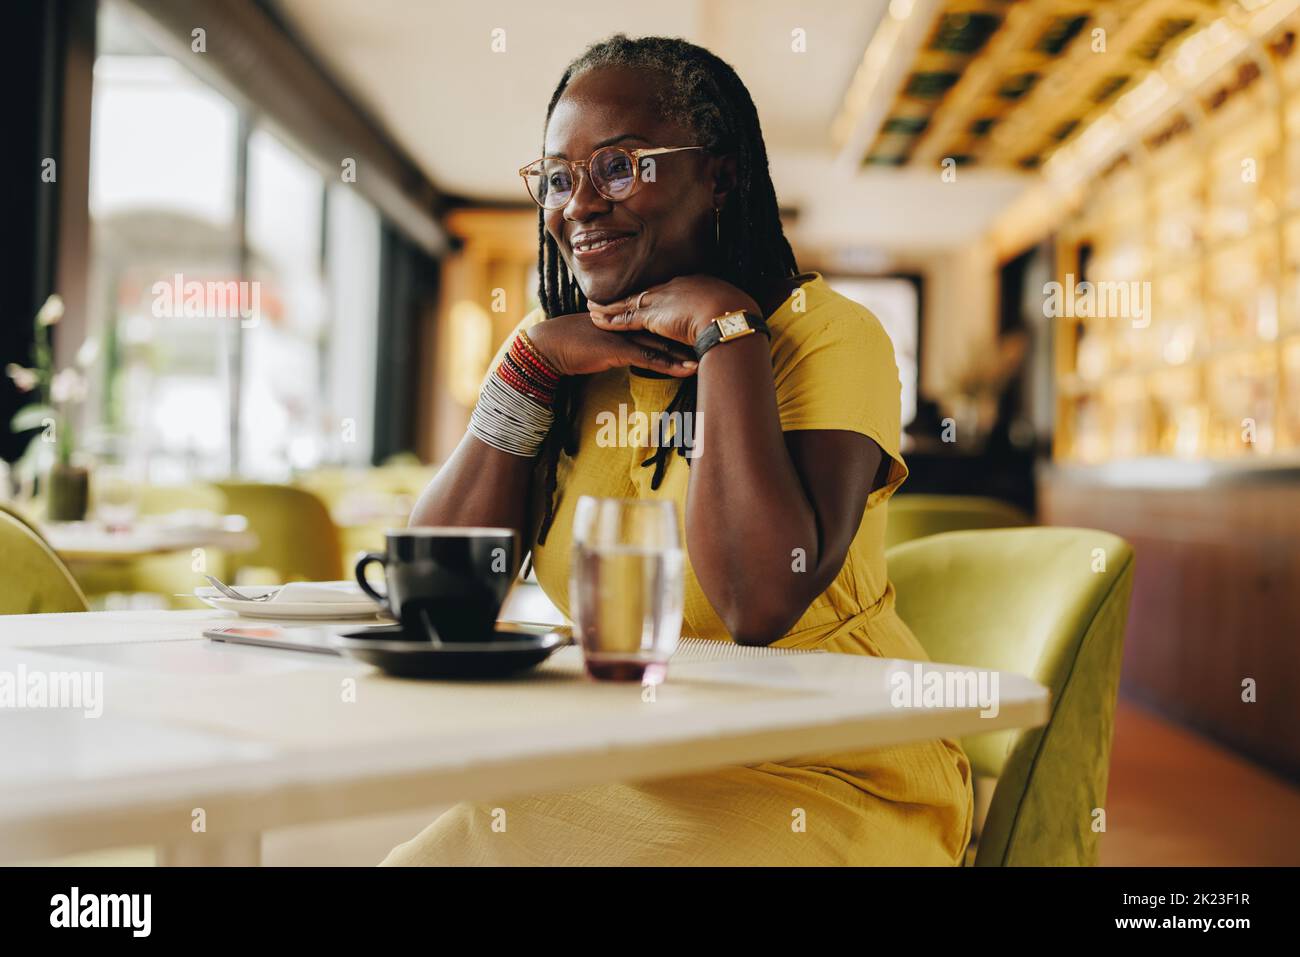 Happy mature woman looking away with a smile while sitting in a cafe. Cheerful woman with dreadlocks spending some time alone in a restaurant. Stock Photo